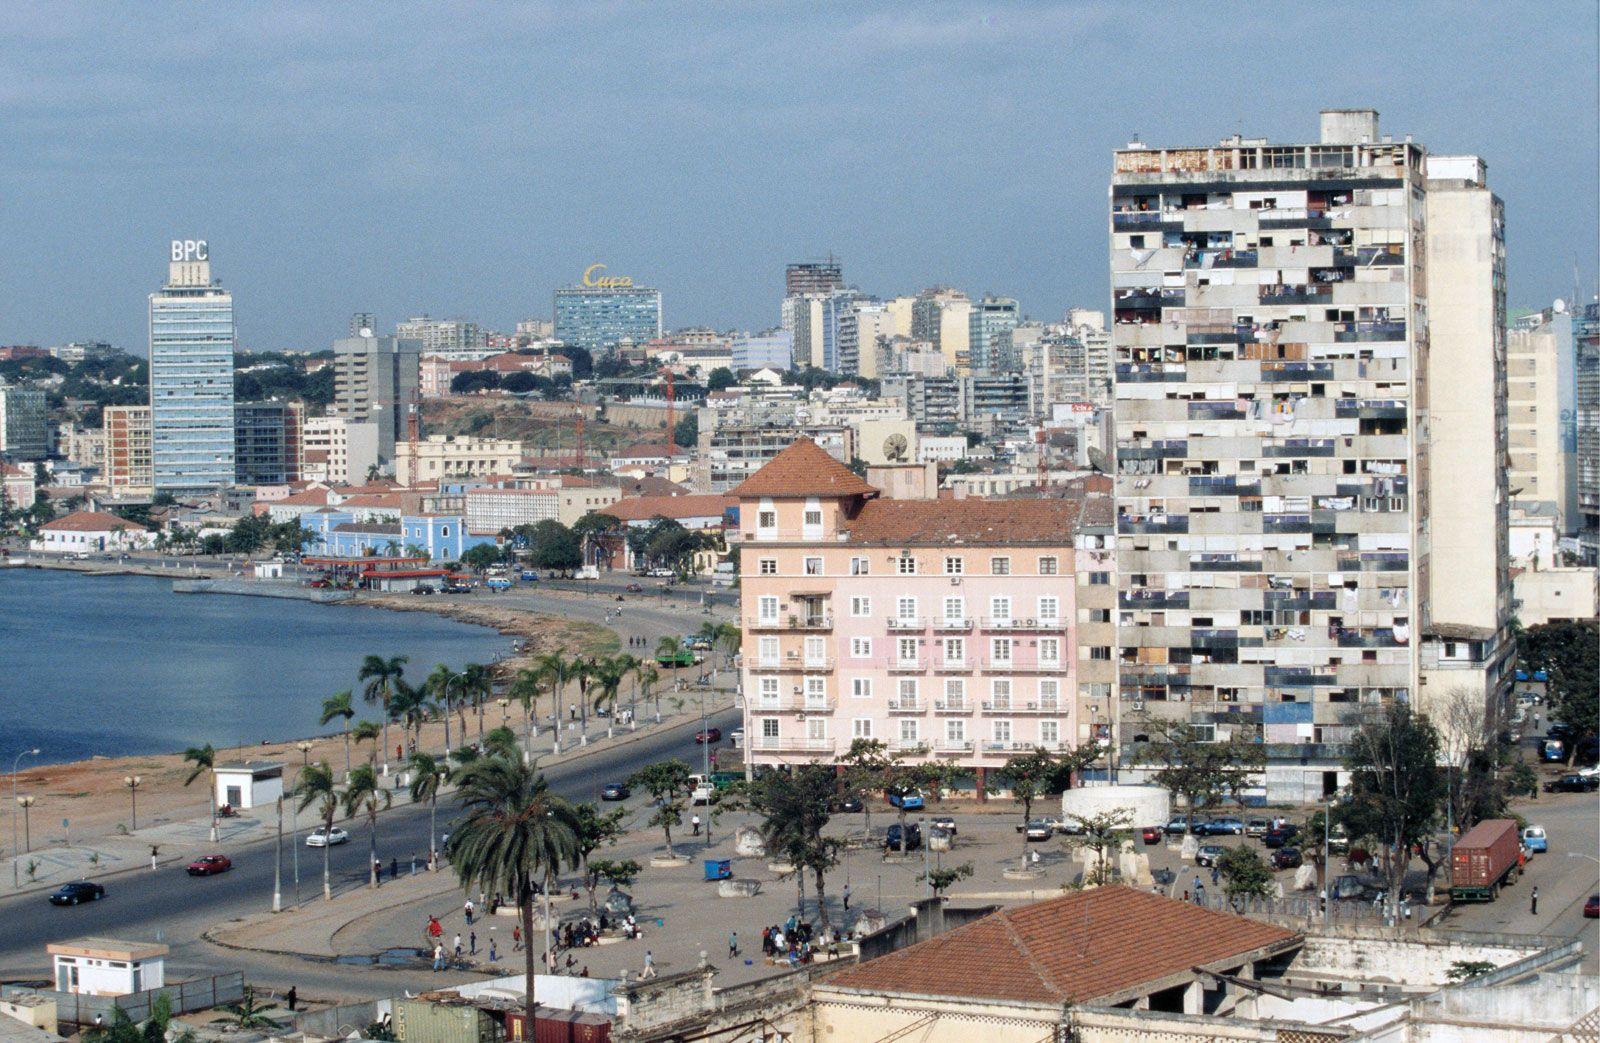 Luanda is the capital and largest city of Angola. Located